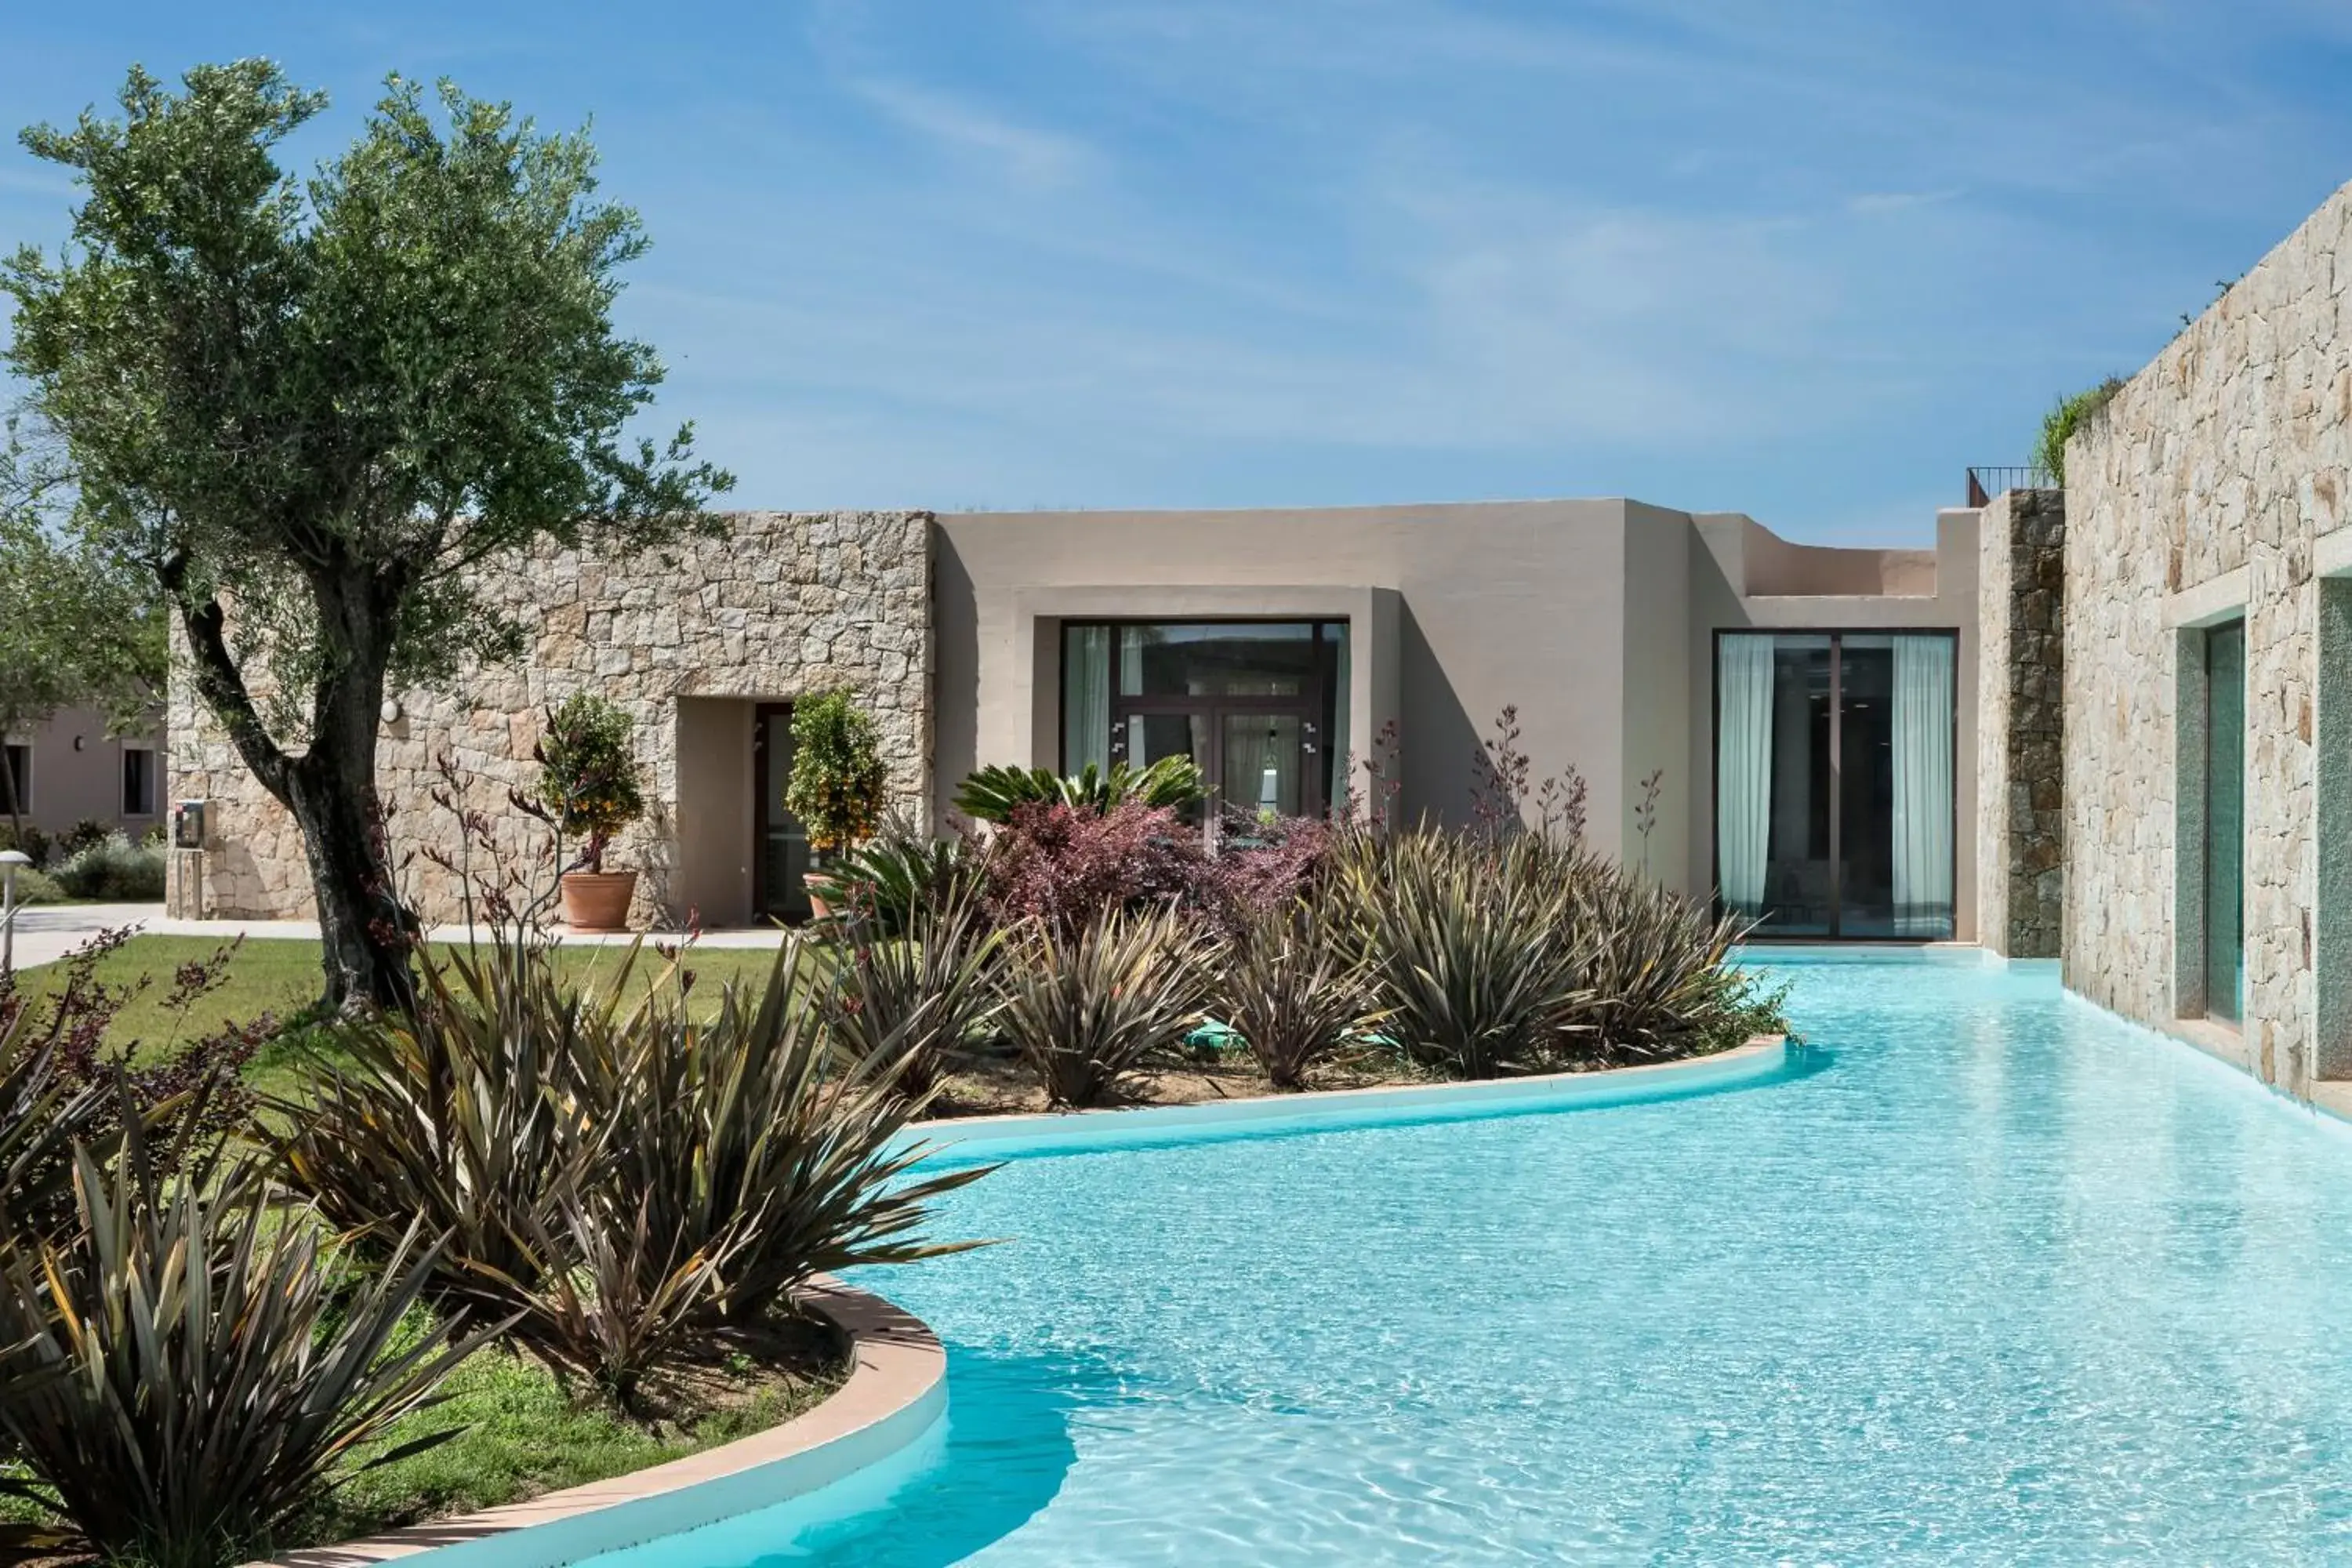 Property building, Swimming Pool in Baglioni Resort Sardinia - The Leading Hotels of the World